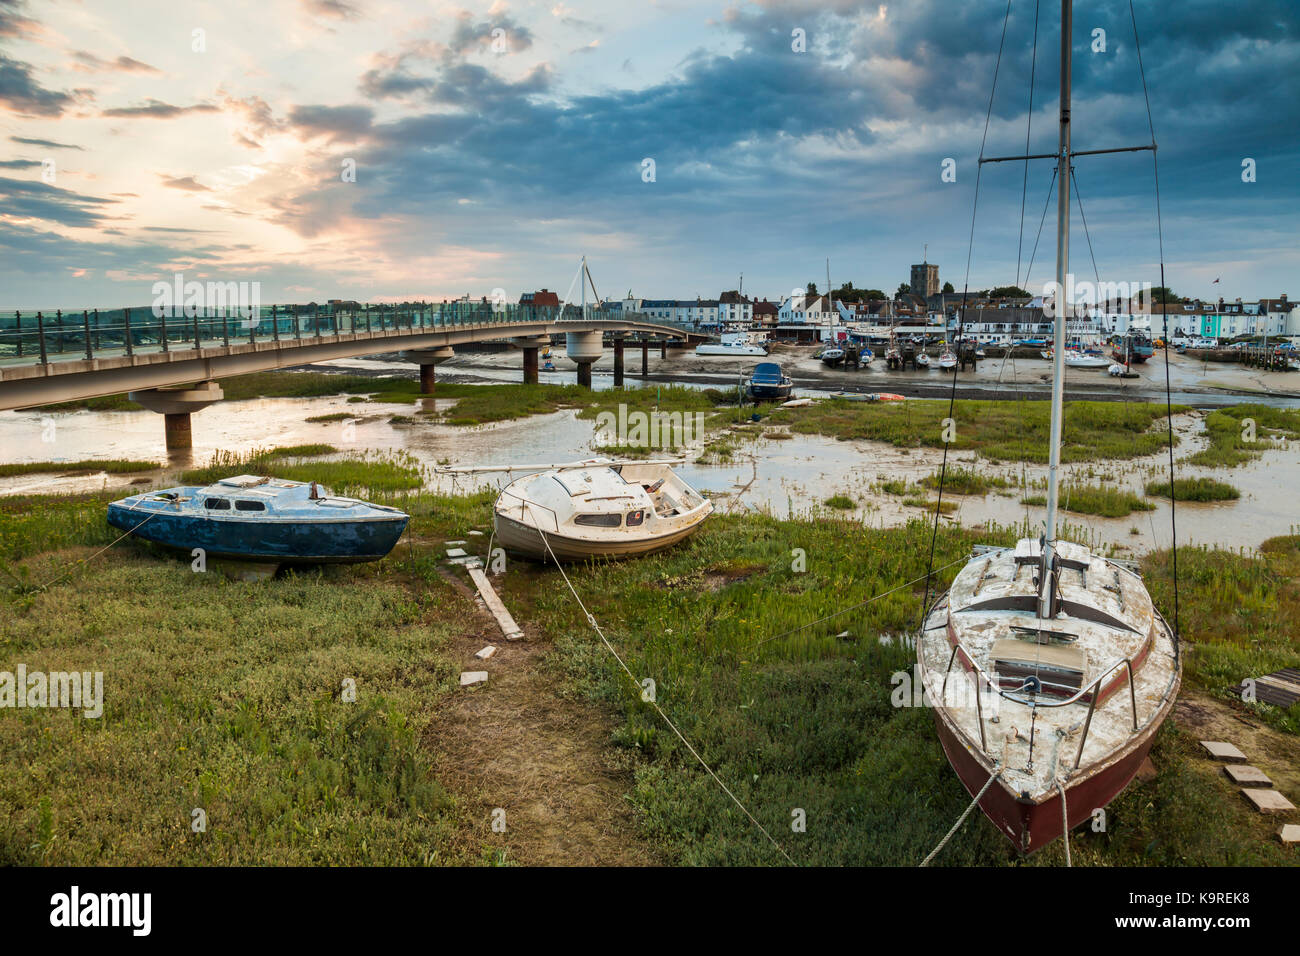 Sunset on river Adur in Shoreham-by-Sea, West Sussex. Stock Photo